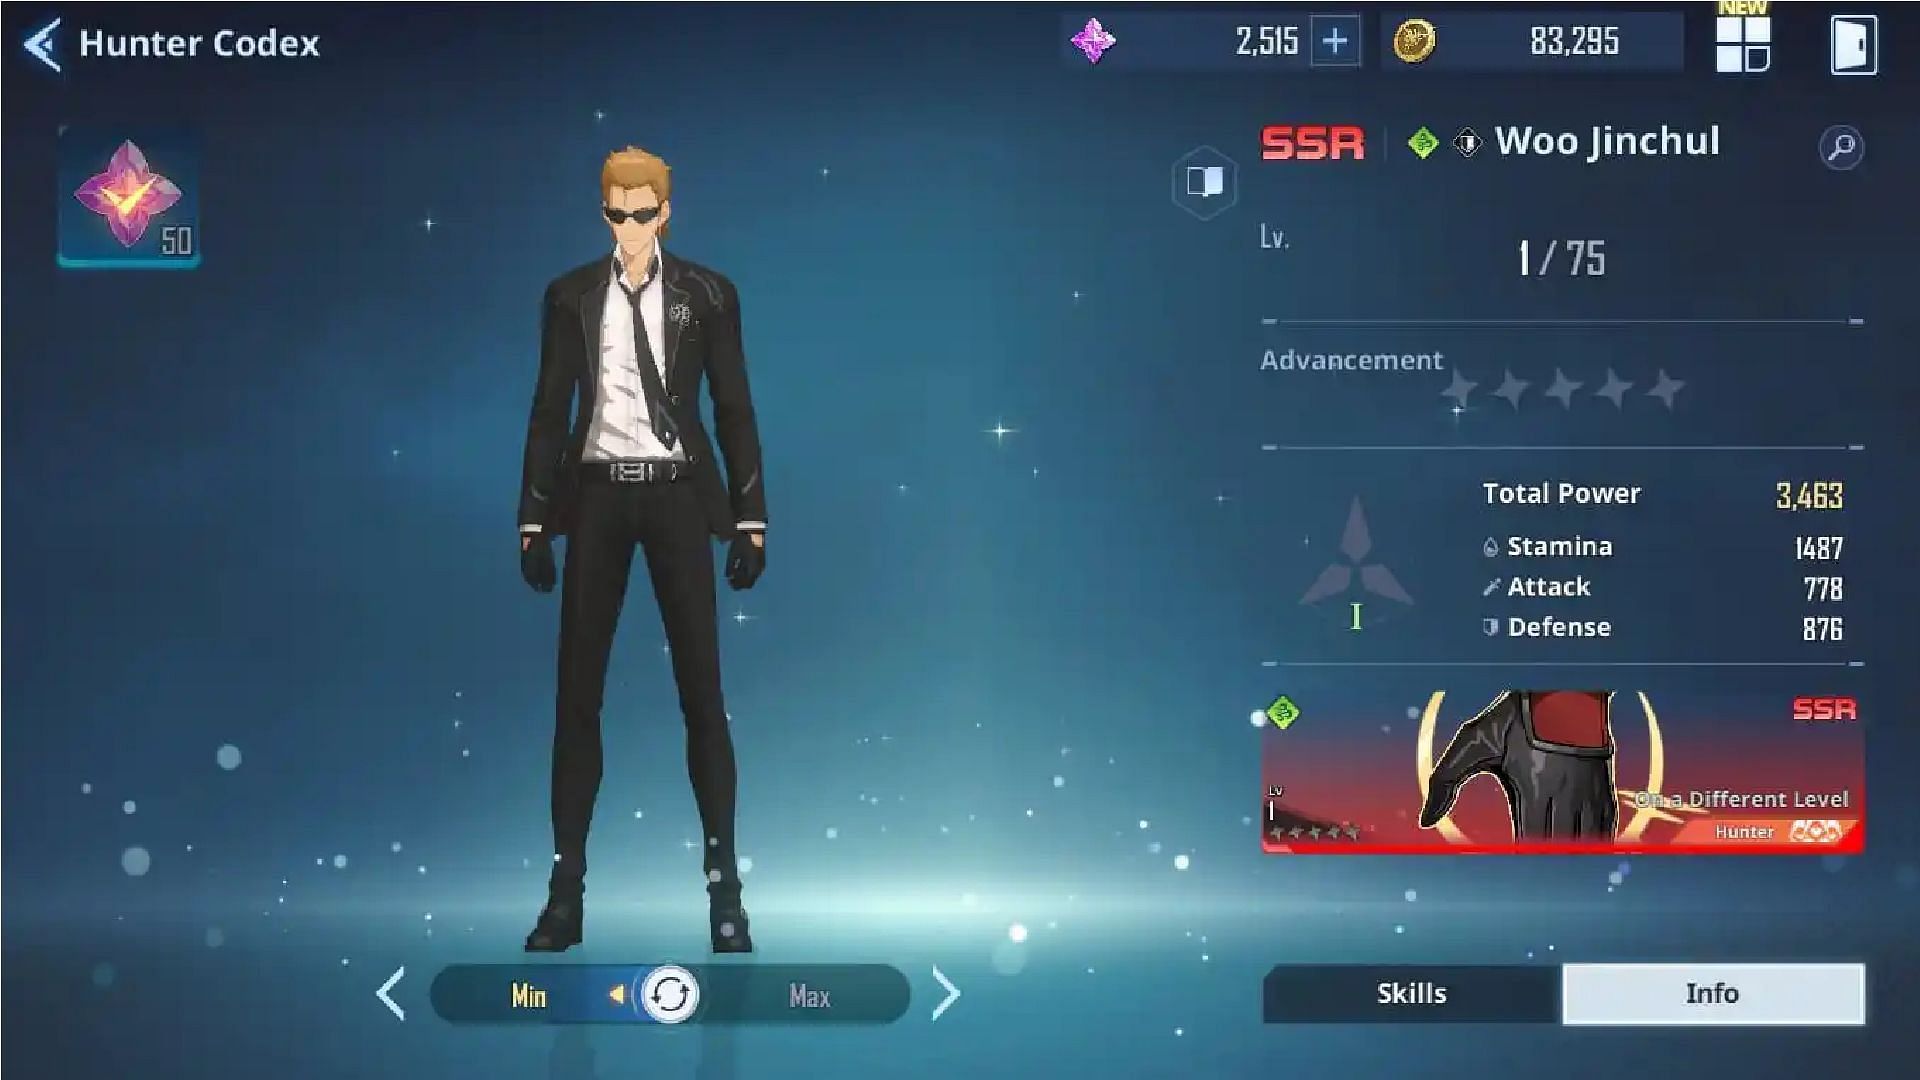 Woo Jinchul does not have much utility (Image via Netmarble)